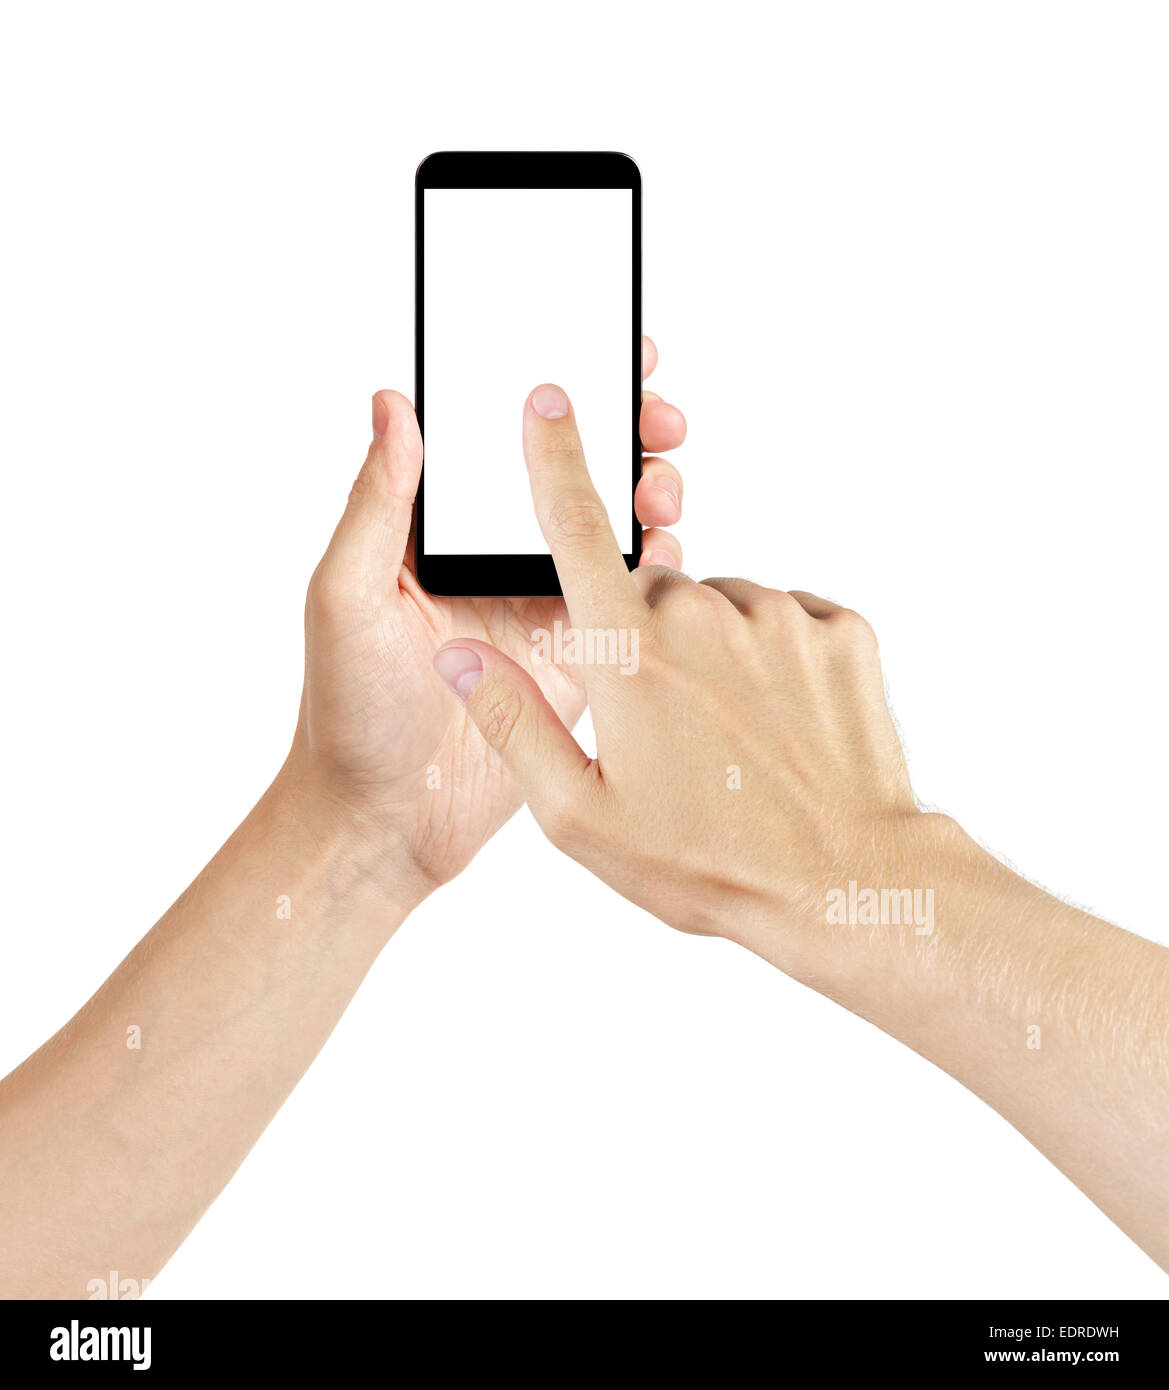 adult man hands using generic mobile phone with white screen, isolated Stock Photo